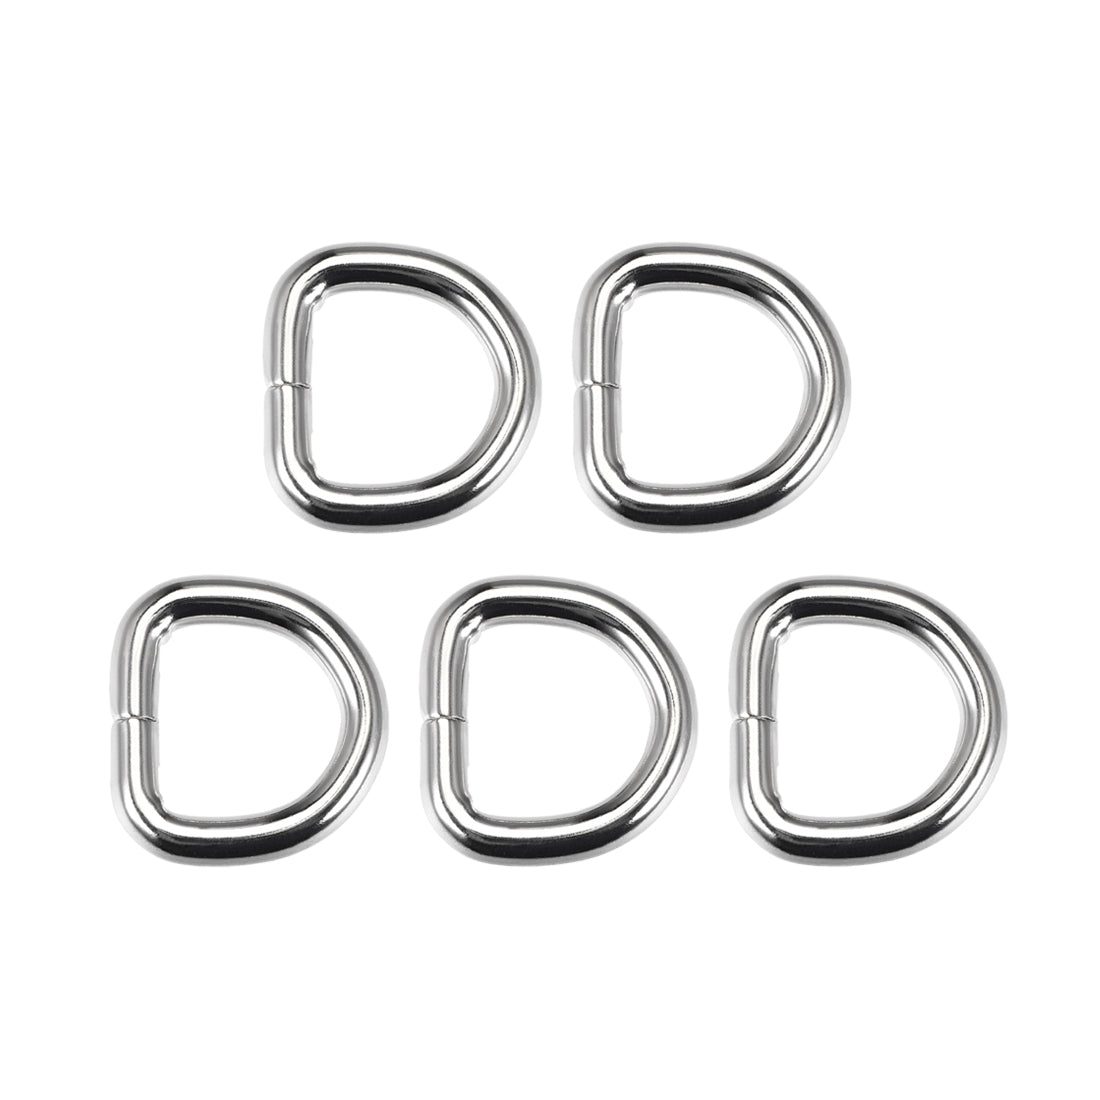 uxcell Uxcell 5 Pcs D Ring Buckle 0.63 Inch Metal Semi-Circular D-Rings 25.5x24x4.5mm Silver for Hardware Bags Belts Craft DIY Accessories